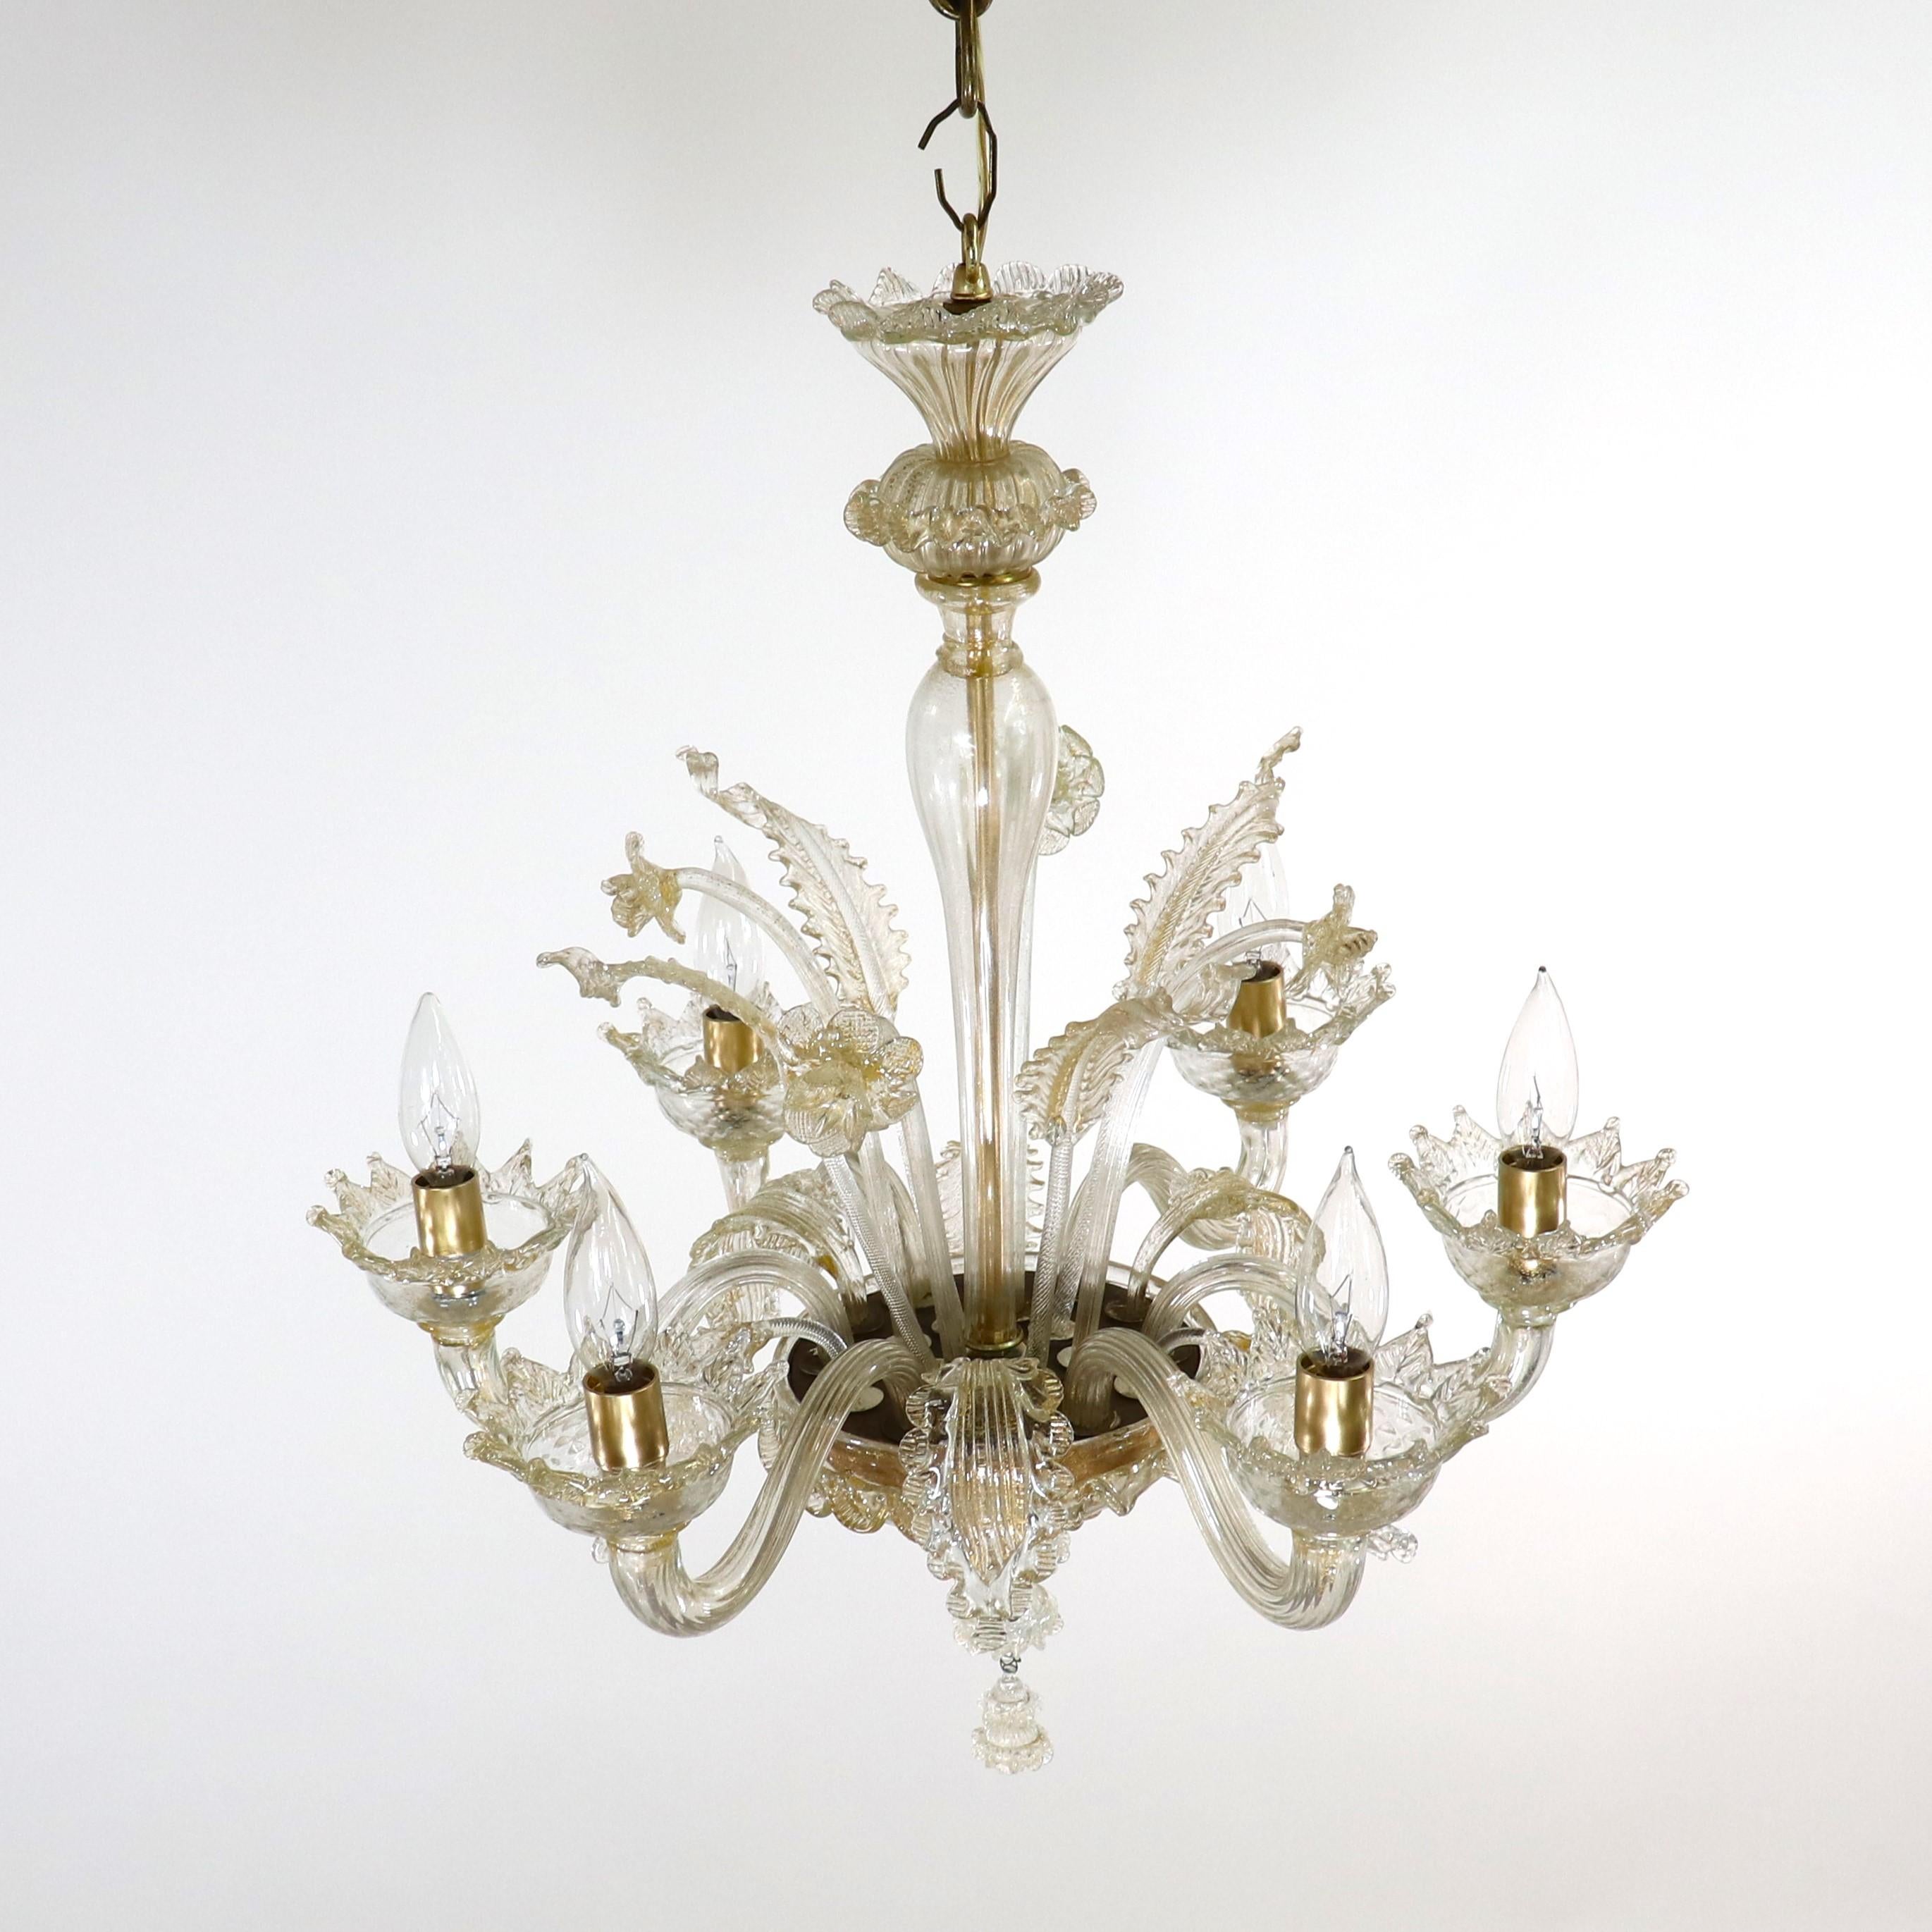  Vintage Baroque Style Gold Infused Cristallo Murano Chandelier In Good Condition For Sale In Chicago, IL